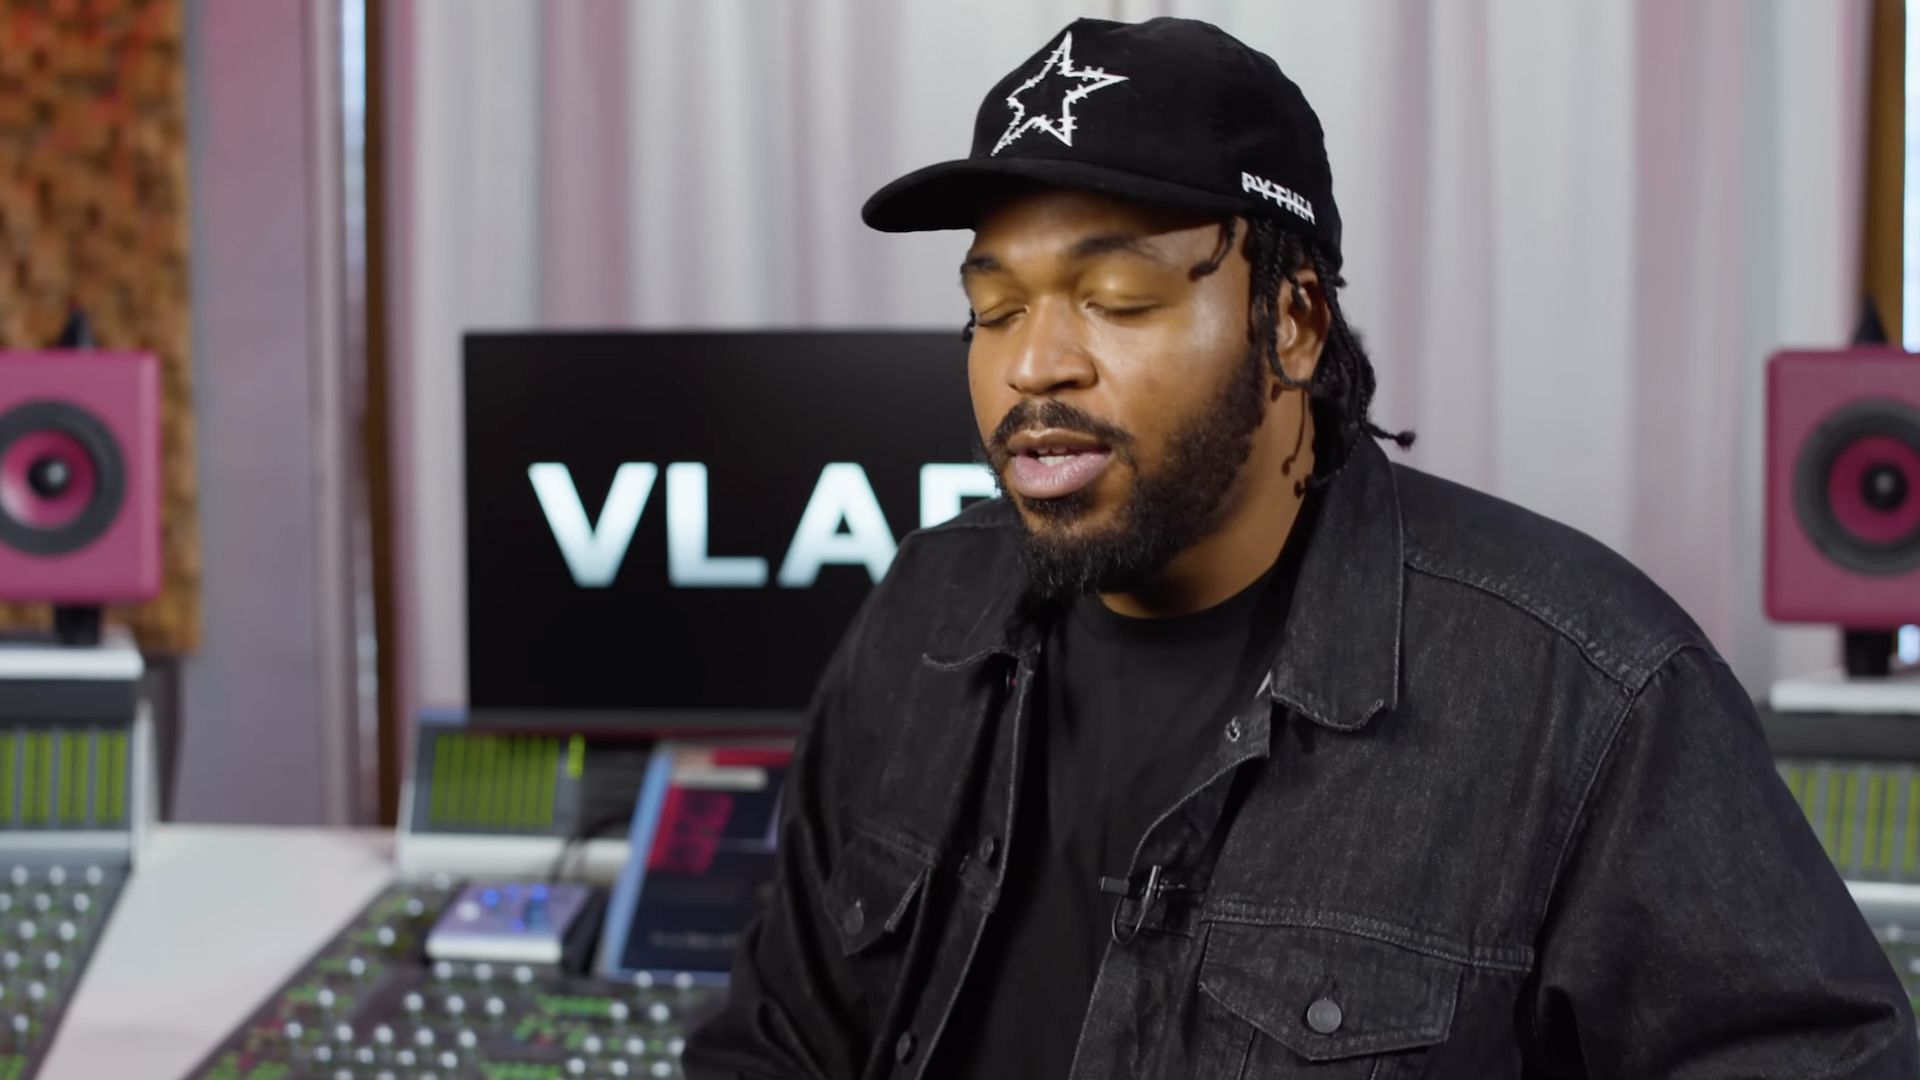 Quentin Miller from his interview with DJ Vlad (Image via YouTube/@vladtv)